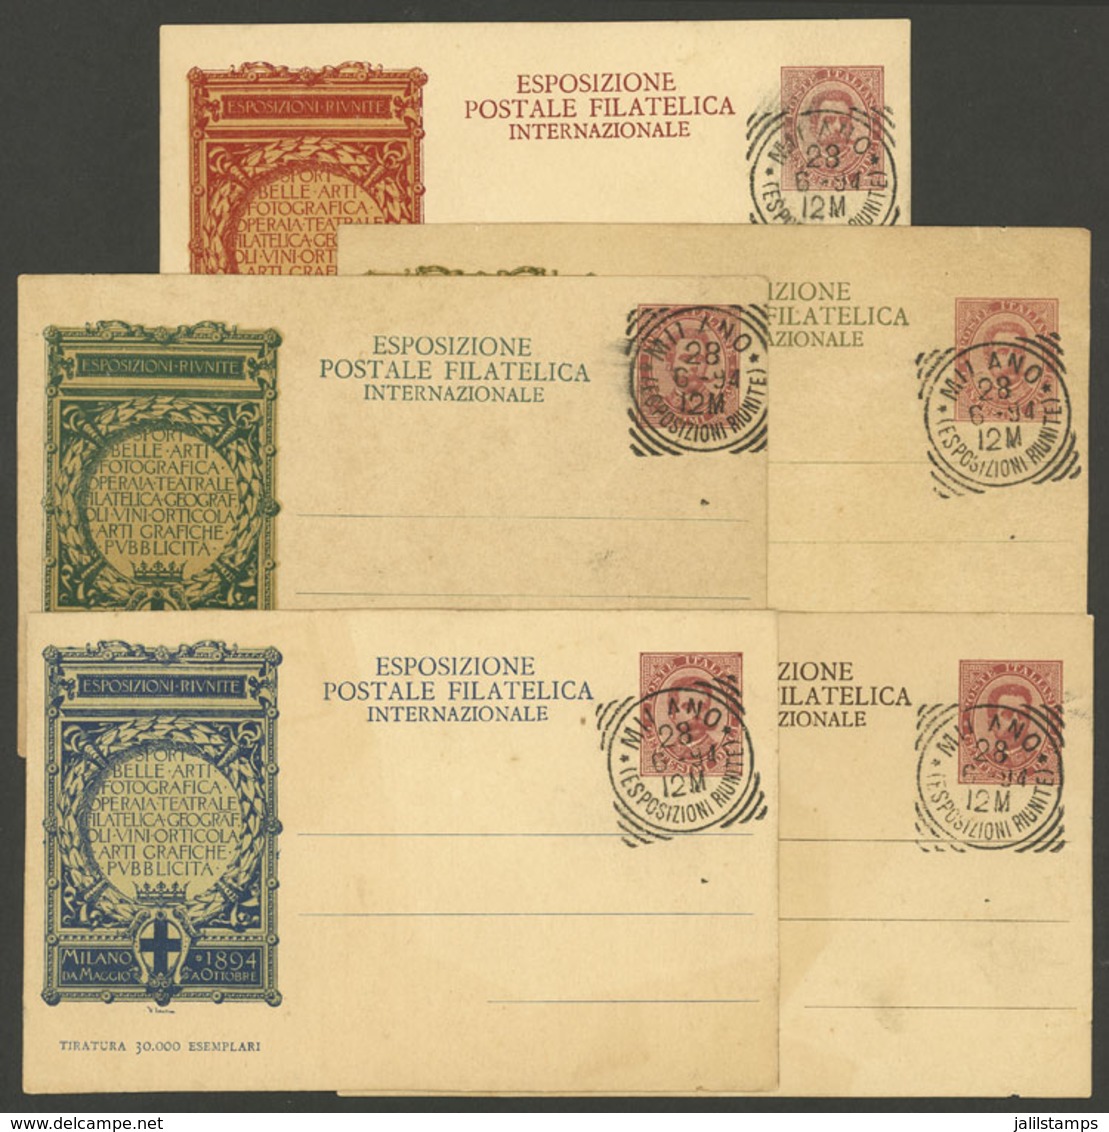 ITALY: 5 Postal Cards Of The 1894 Milano Intl. Exhibition, With Special Postmark Of The Expo Of 28/JUN, Very Nice! - Non Classificati